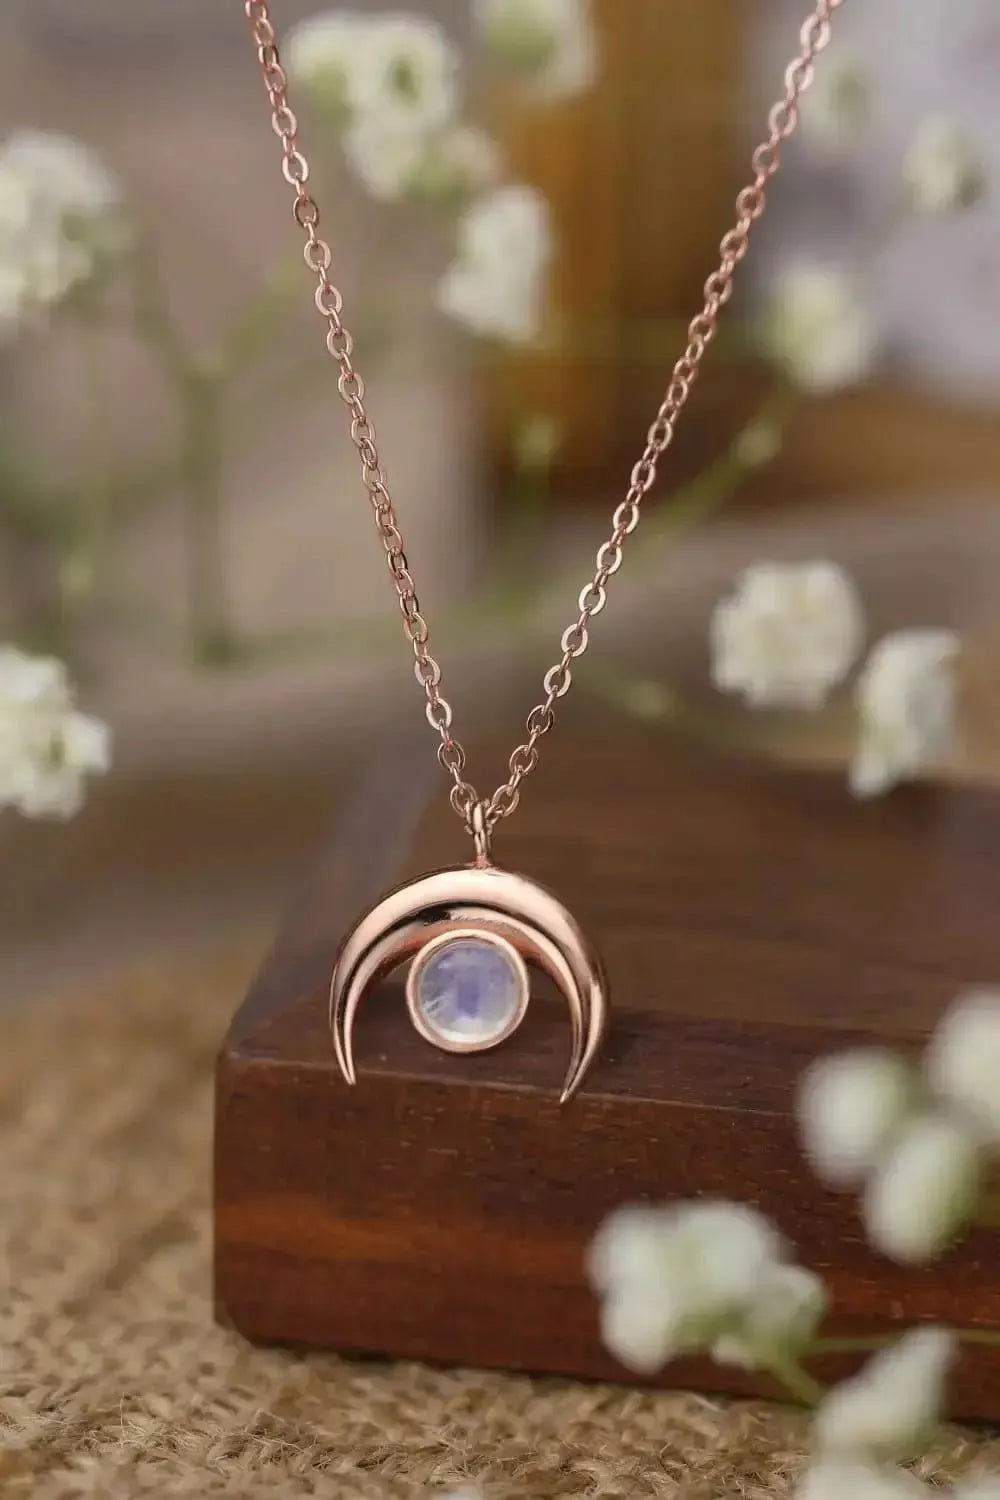 High Quality Natural Moonstone Moon Pendant 925 Sterling Silver Necklace - Godiva Oya Bey